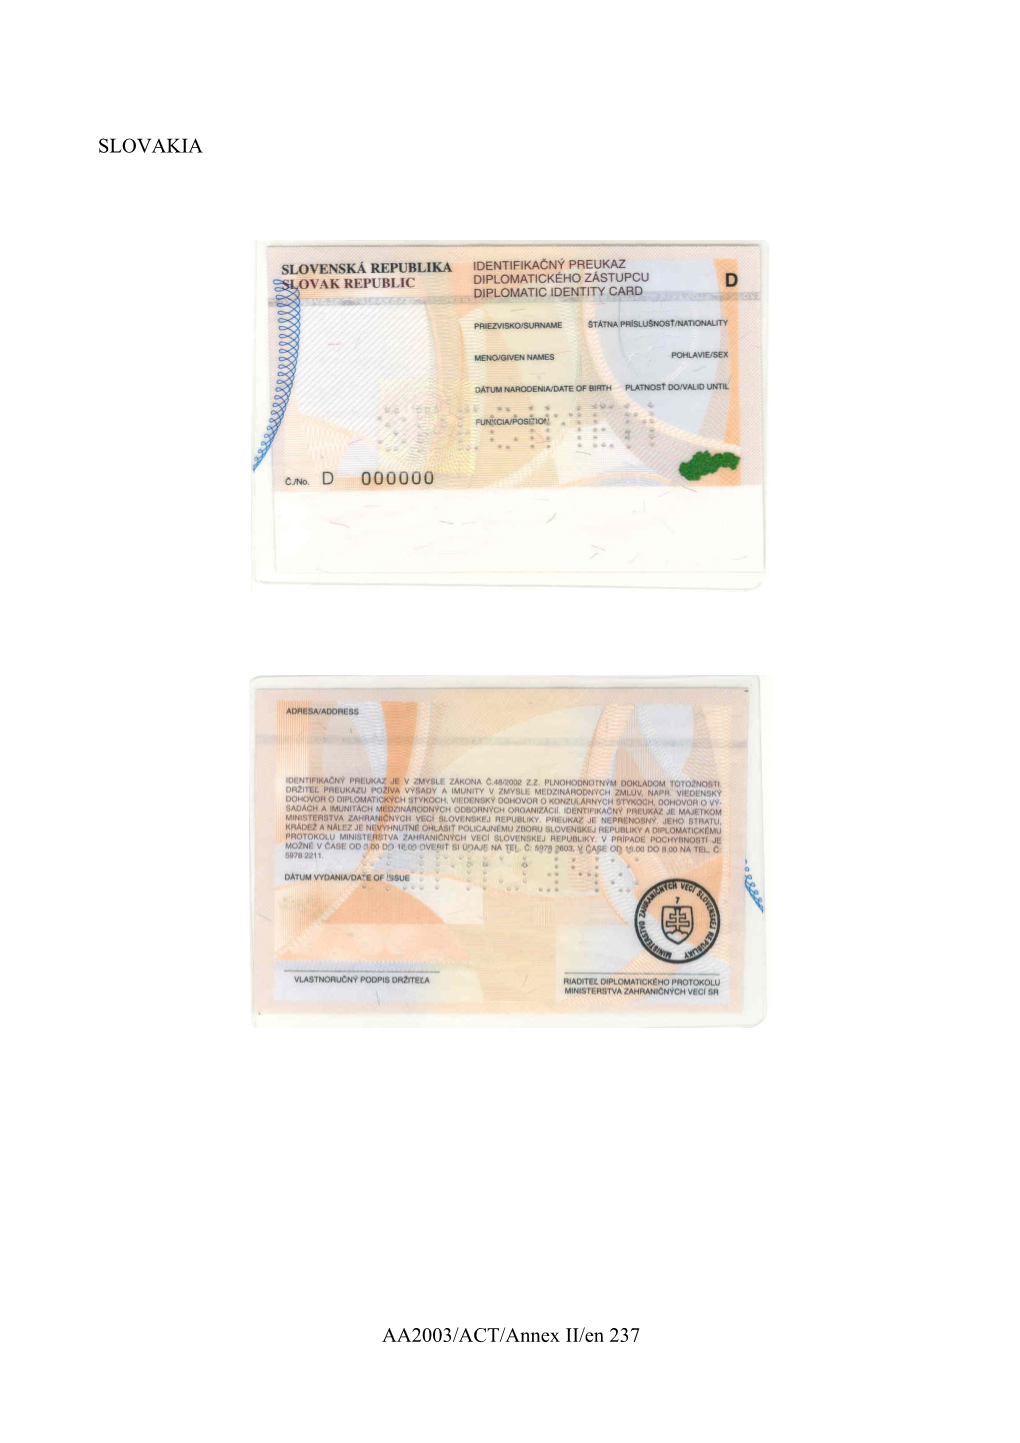 1.Type D (Red) Identity Cards Issued for Diplomats and Their Family Members